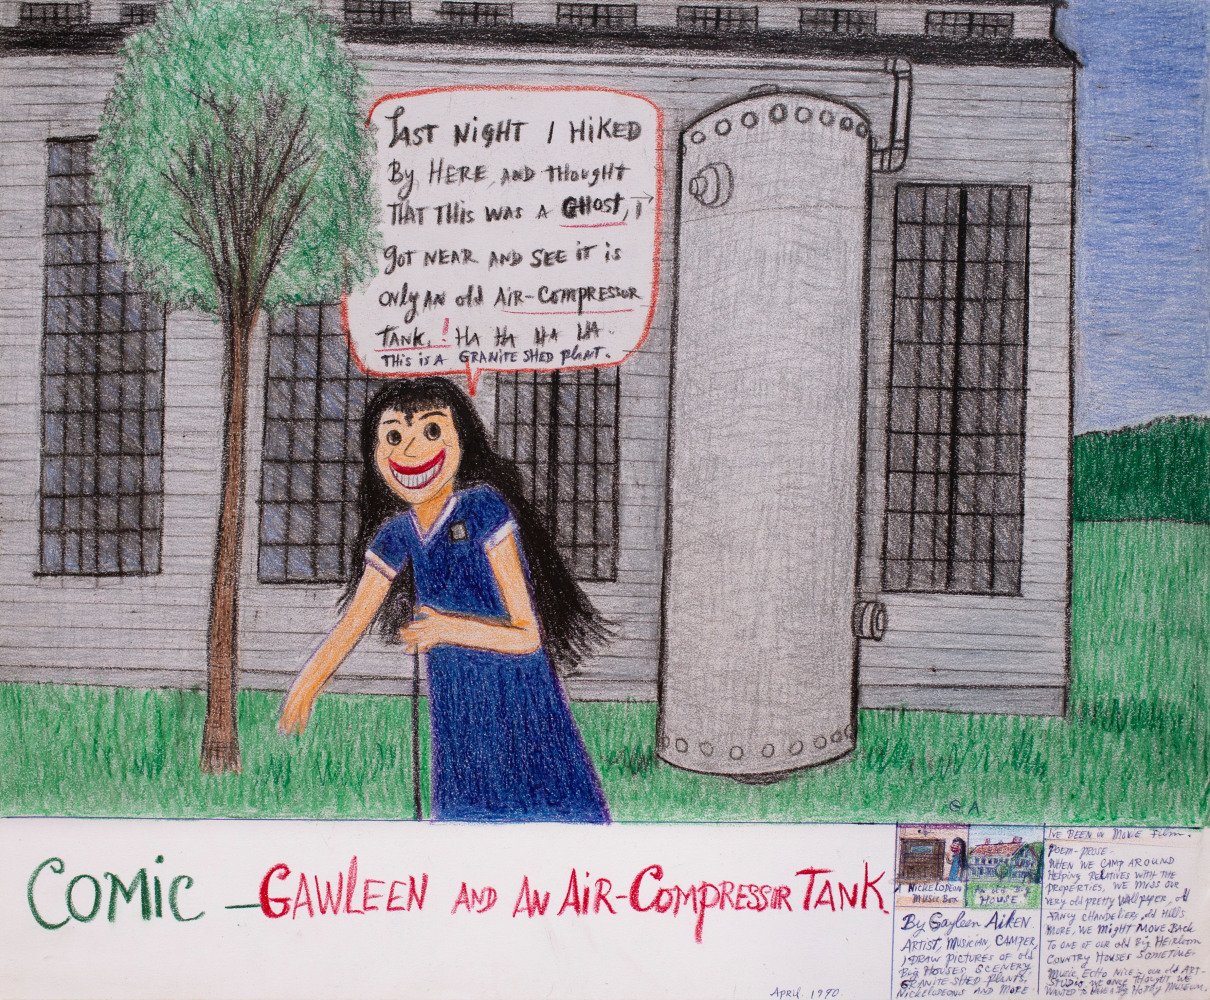 Comic- Gawleen and an Air-Compressor Tank, 1990
Colored pencil, ballpoint pen, and crayon on paper
14 x 17 inches